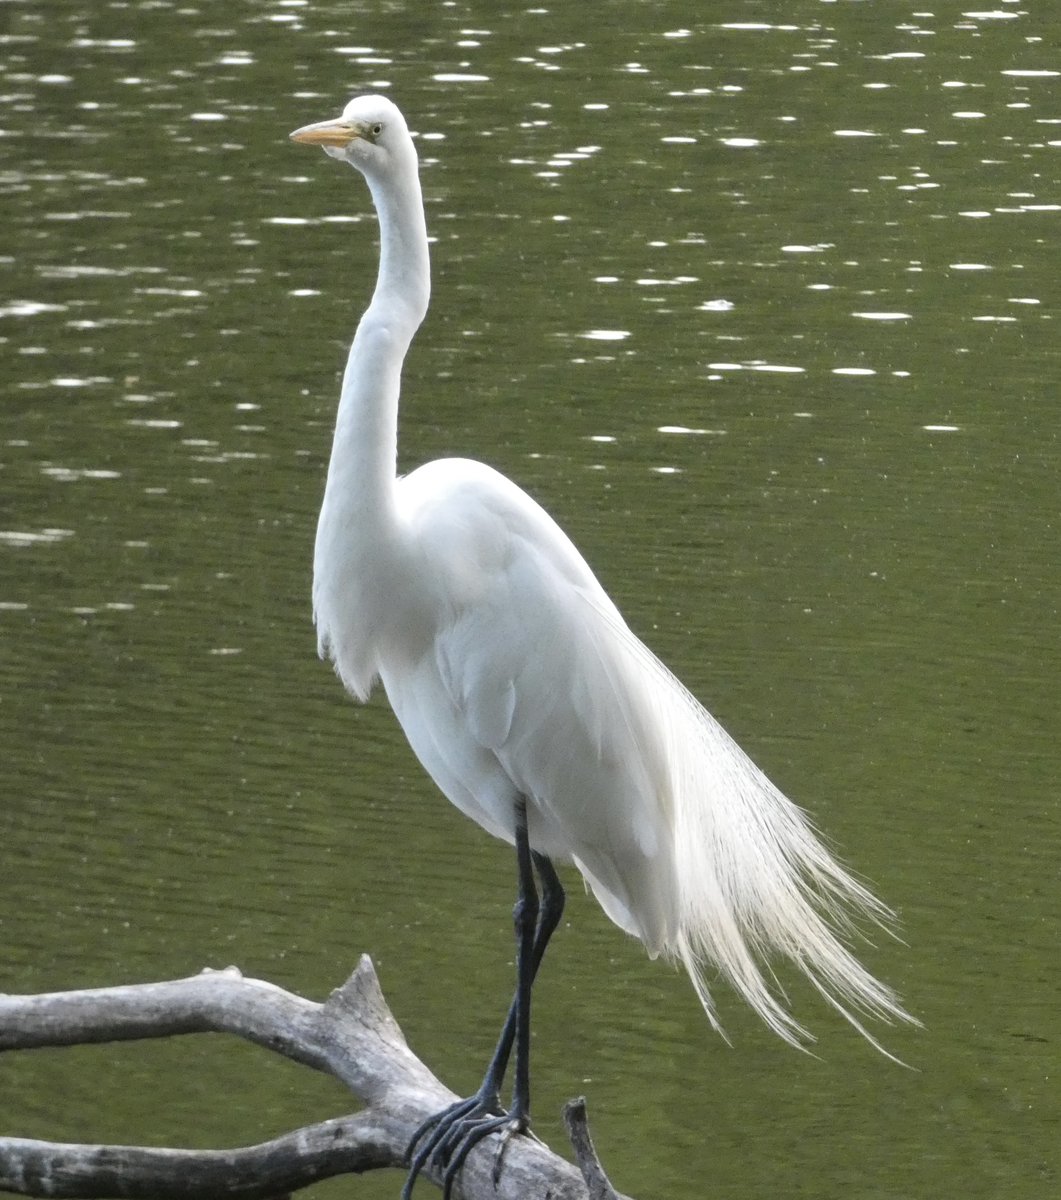 For #WaderWednesday, Great #Egret standing tall, Clove Lakes Park